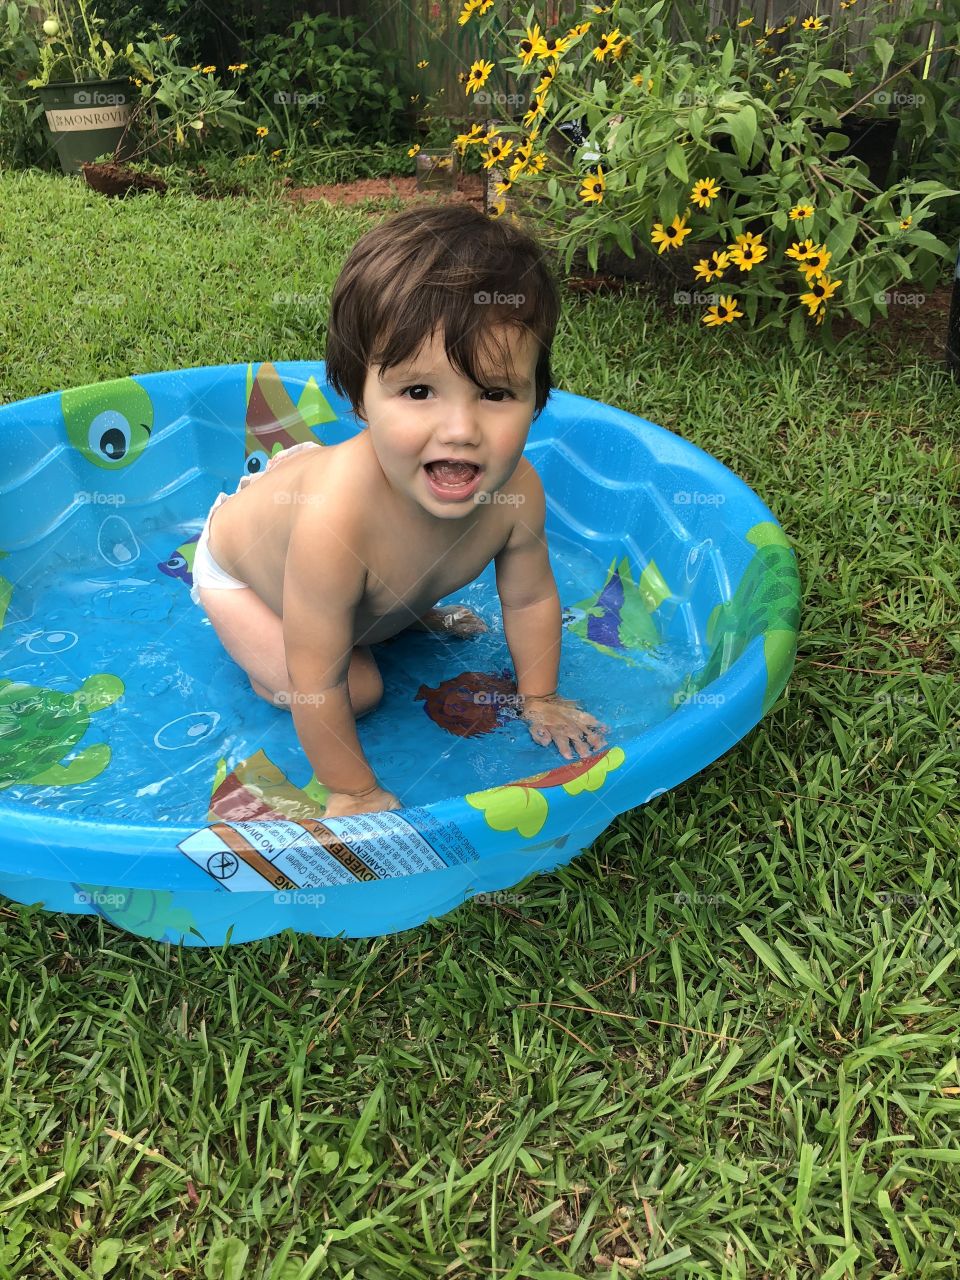 Toddler boy playing in a small blue pool in the yard. 